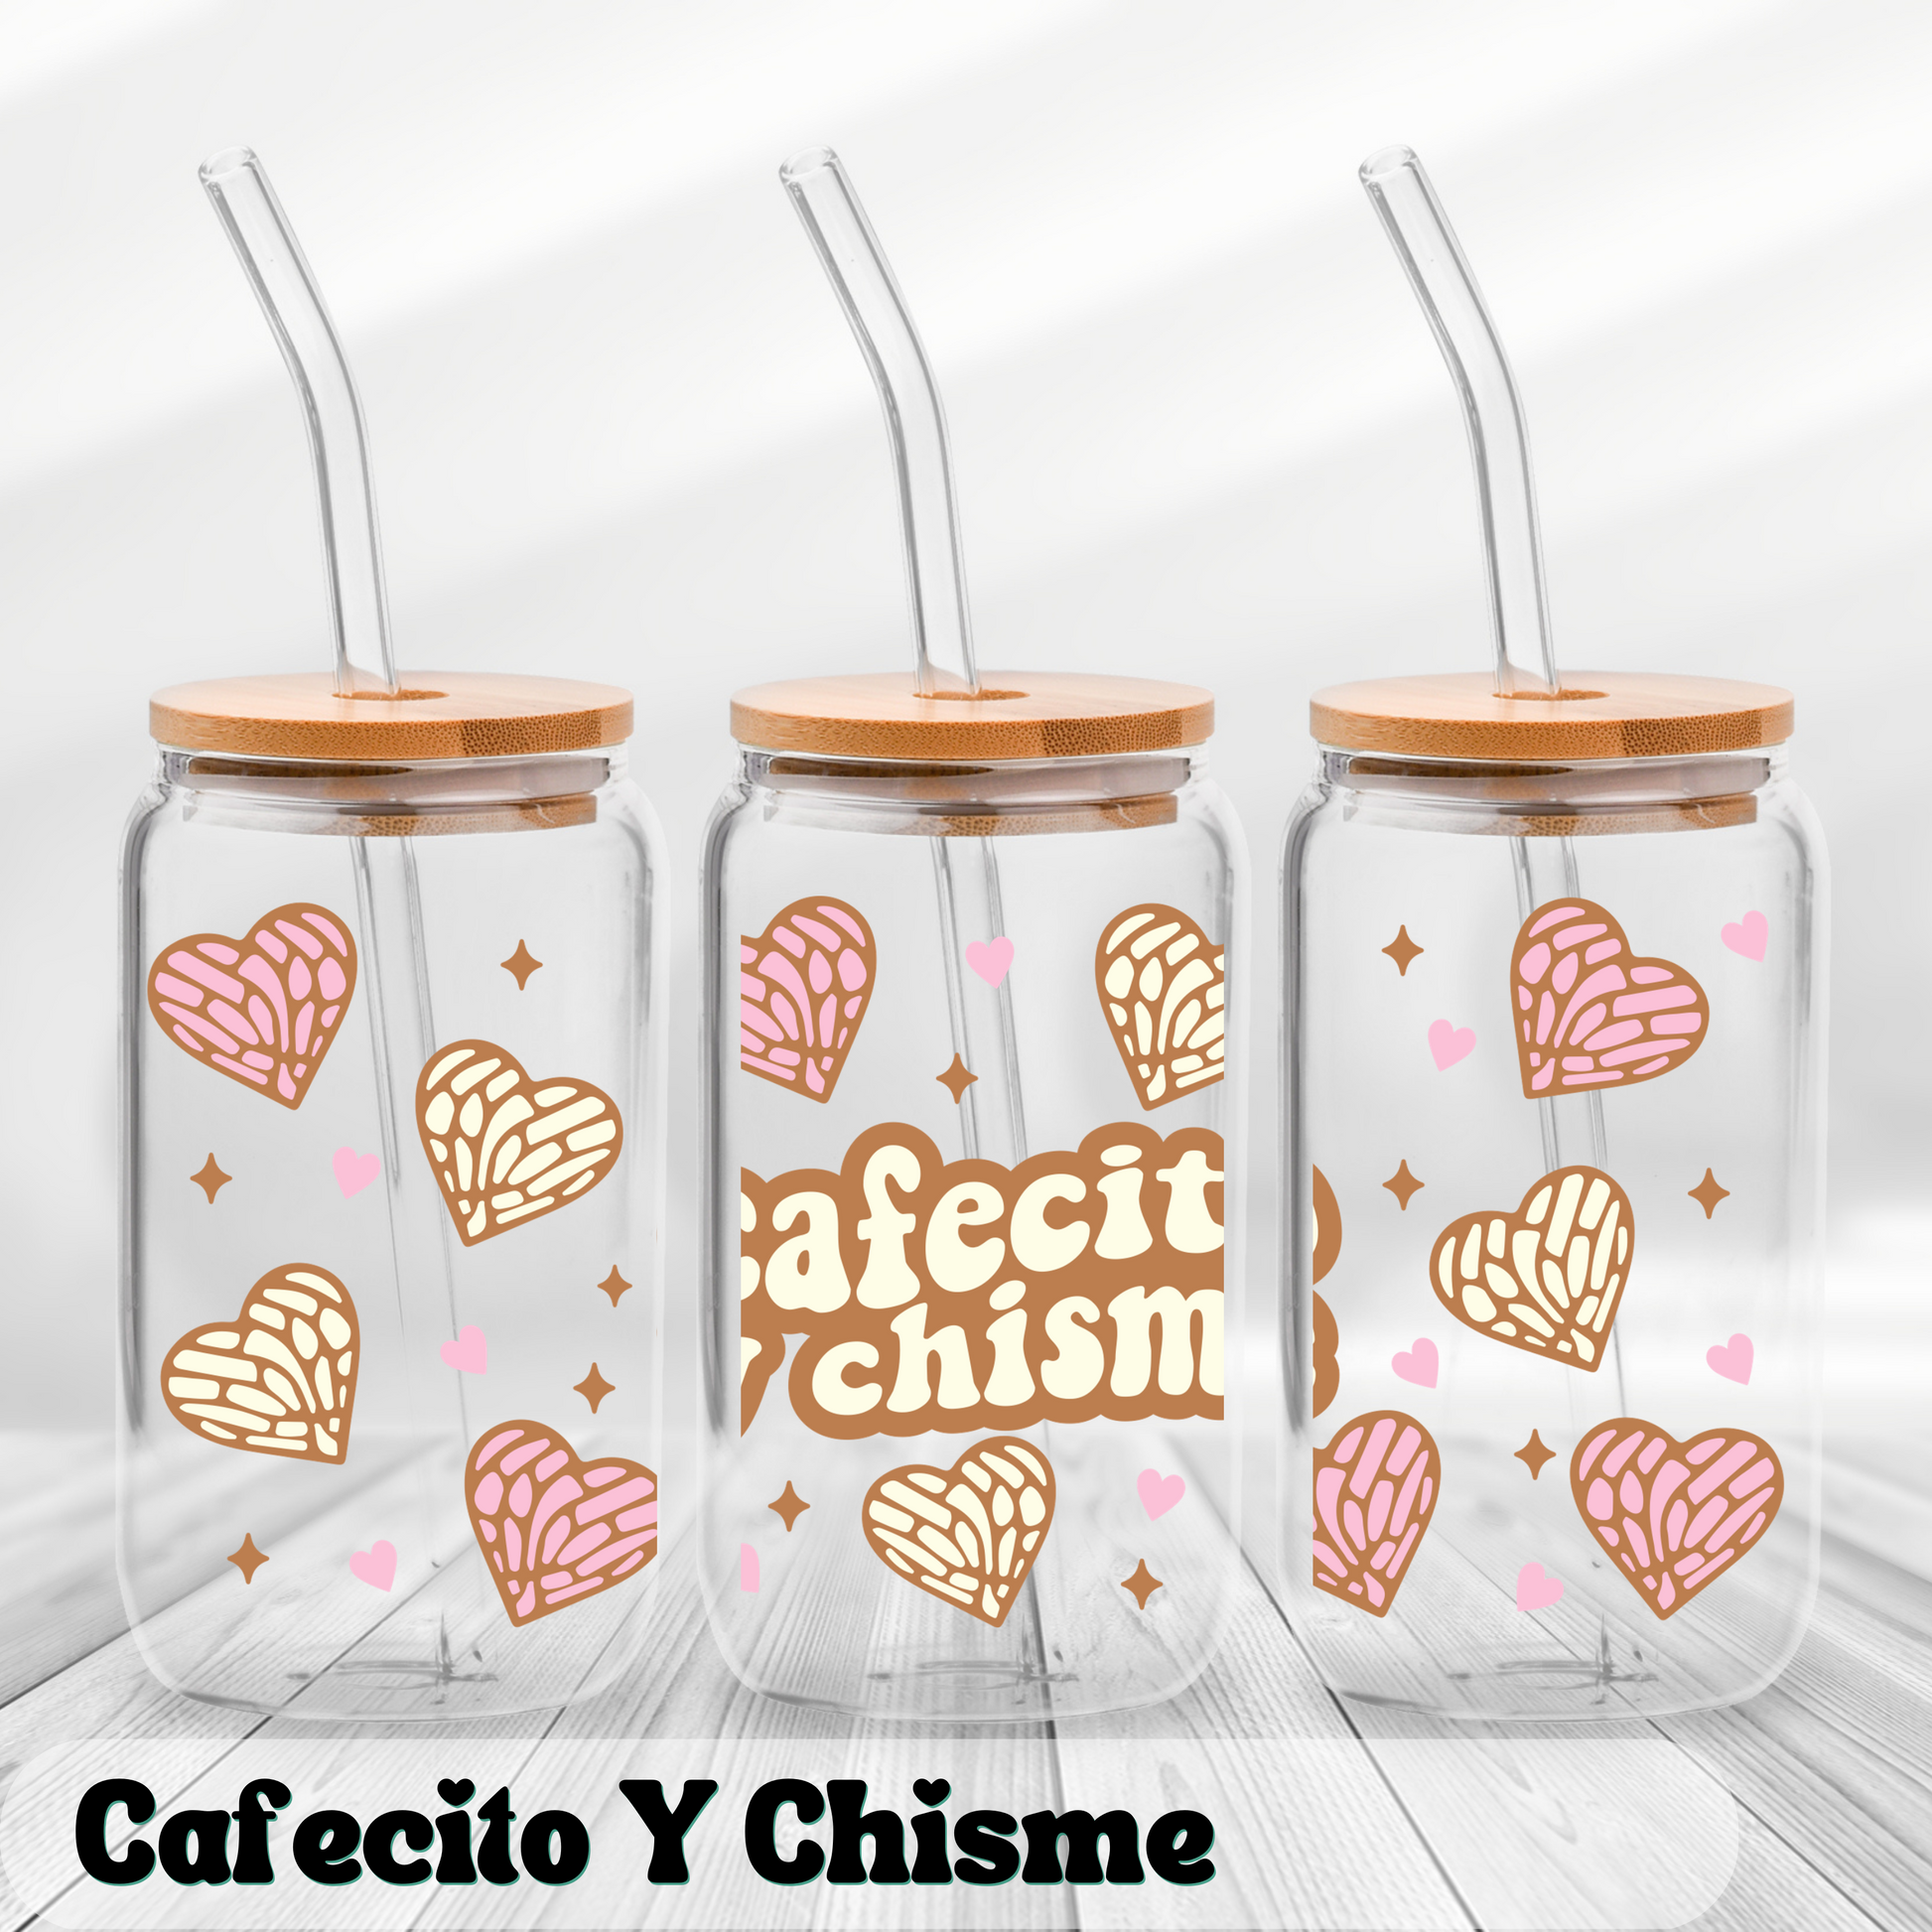 Cafecito y Chisme Glass Cup – Made By Gigii